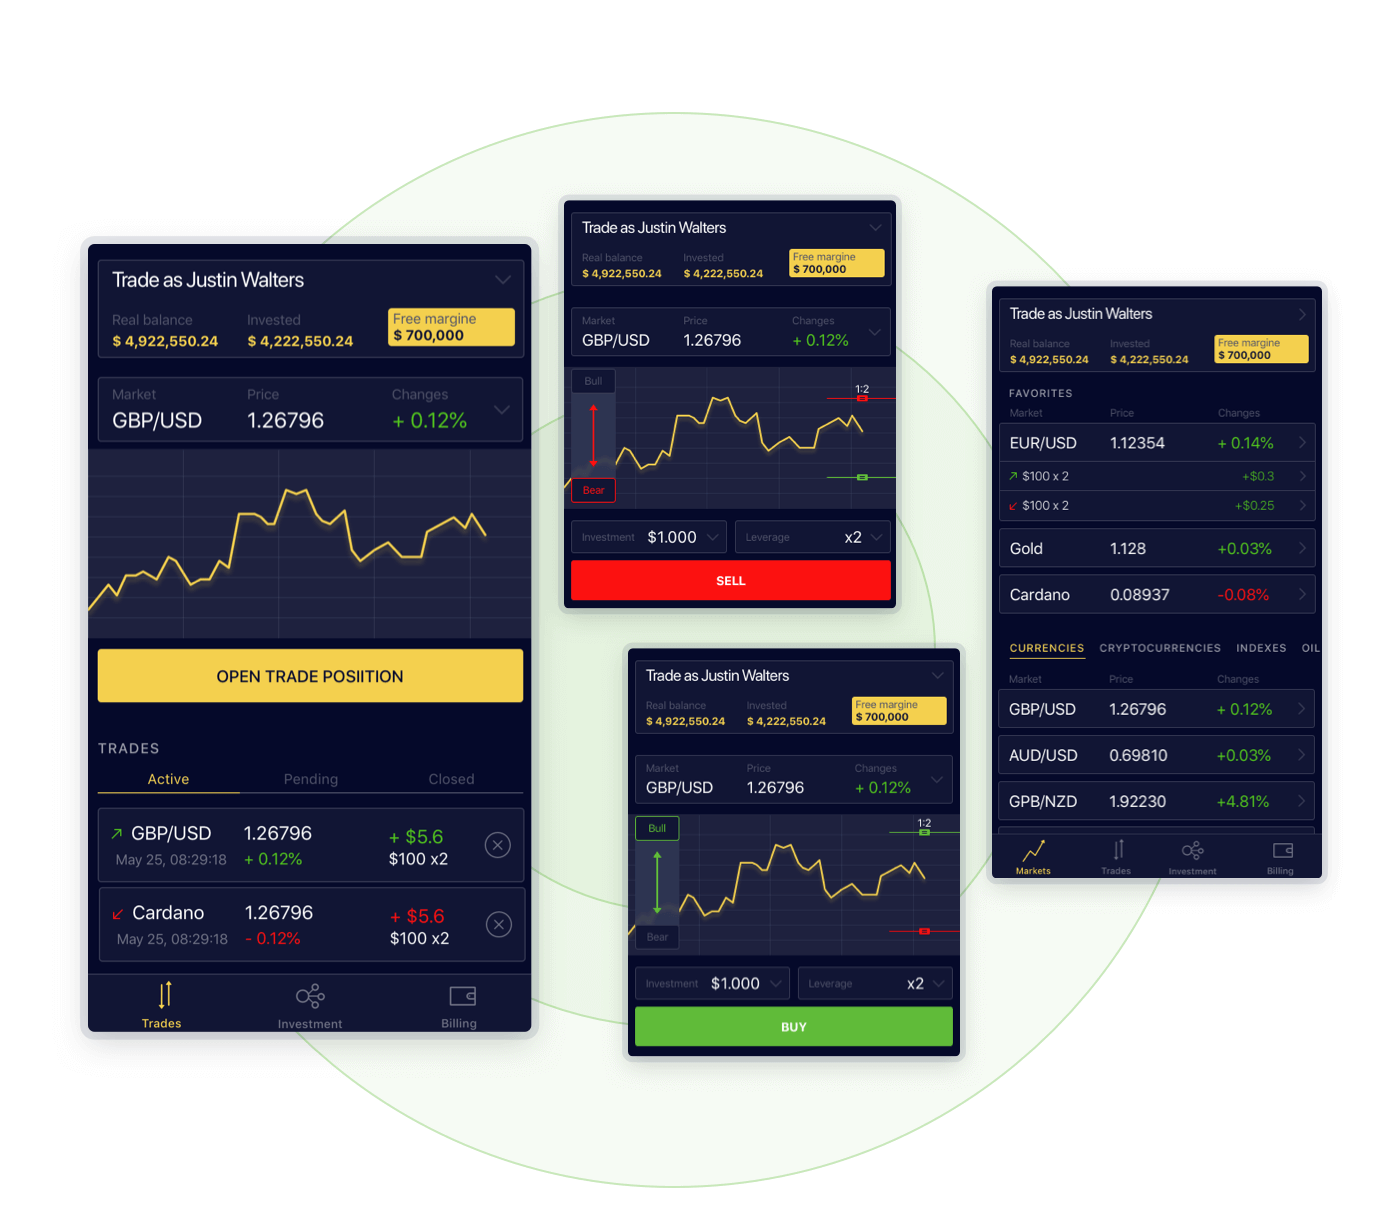 A dedicated team for a fintech trading tool